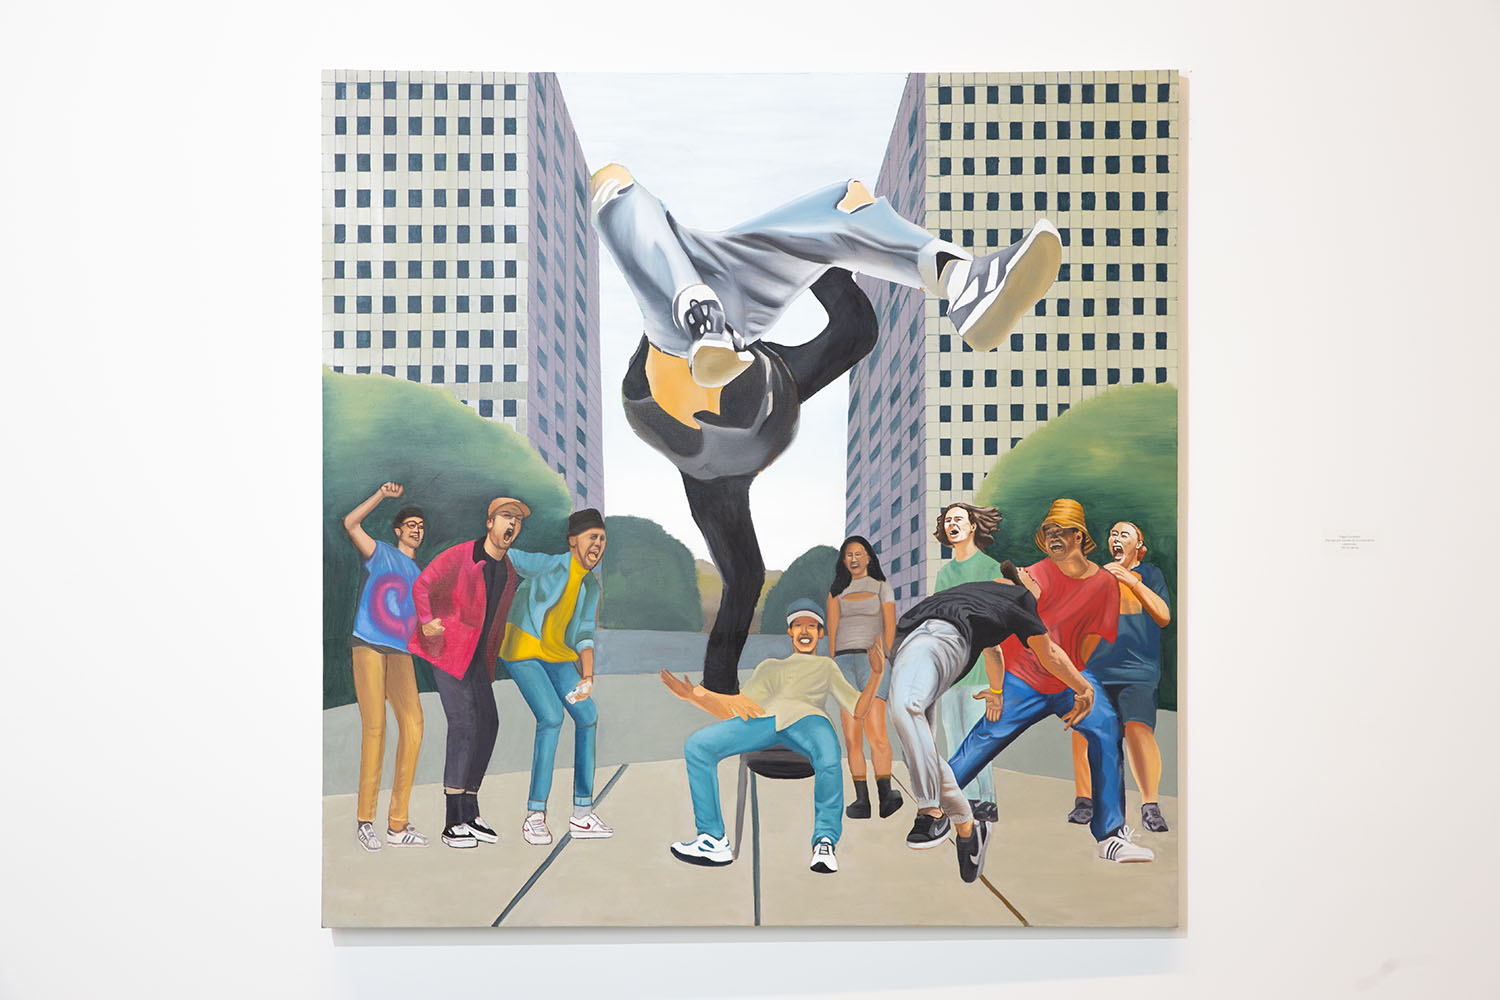 Oil painting of cheering crowd and breakdancer in mid-flight.